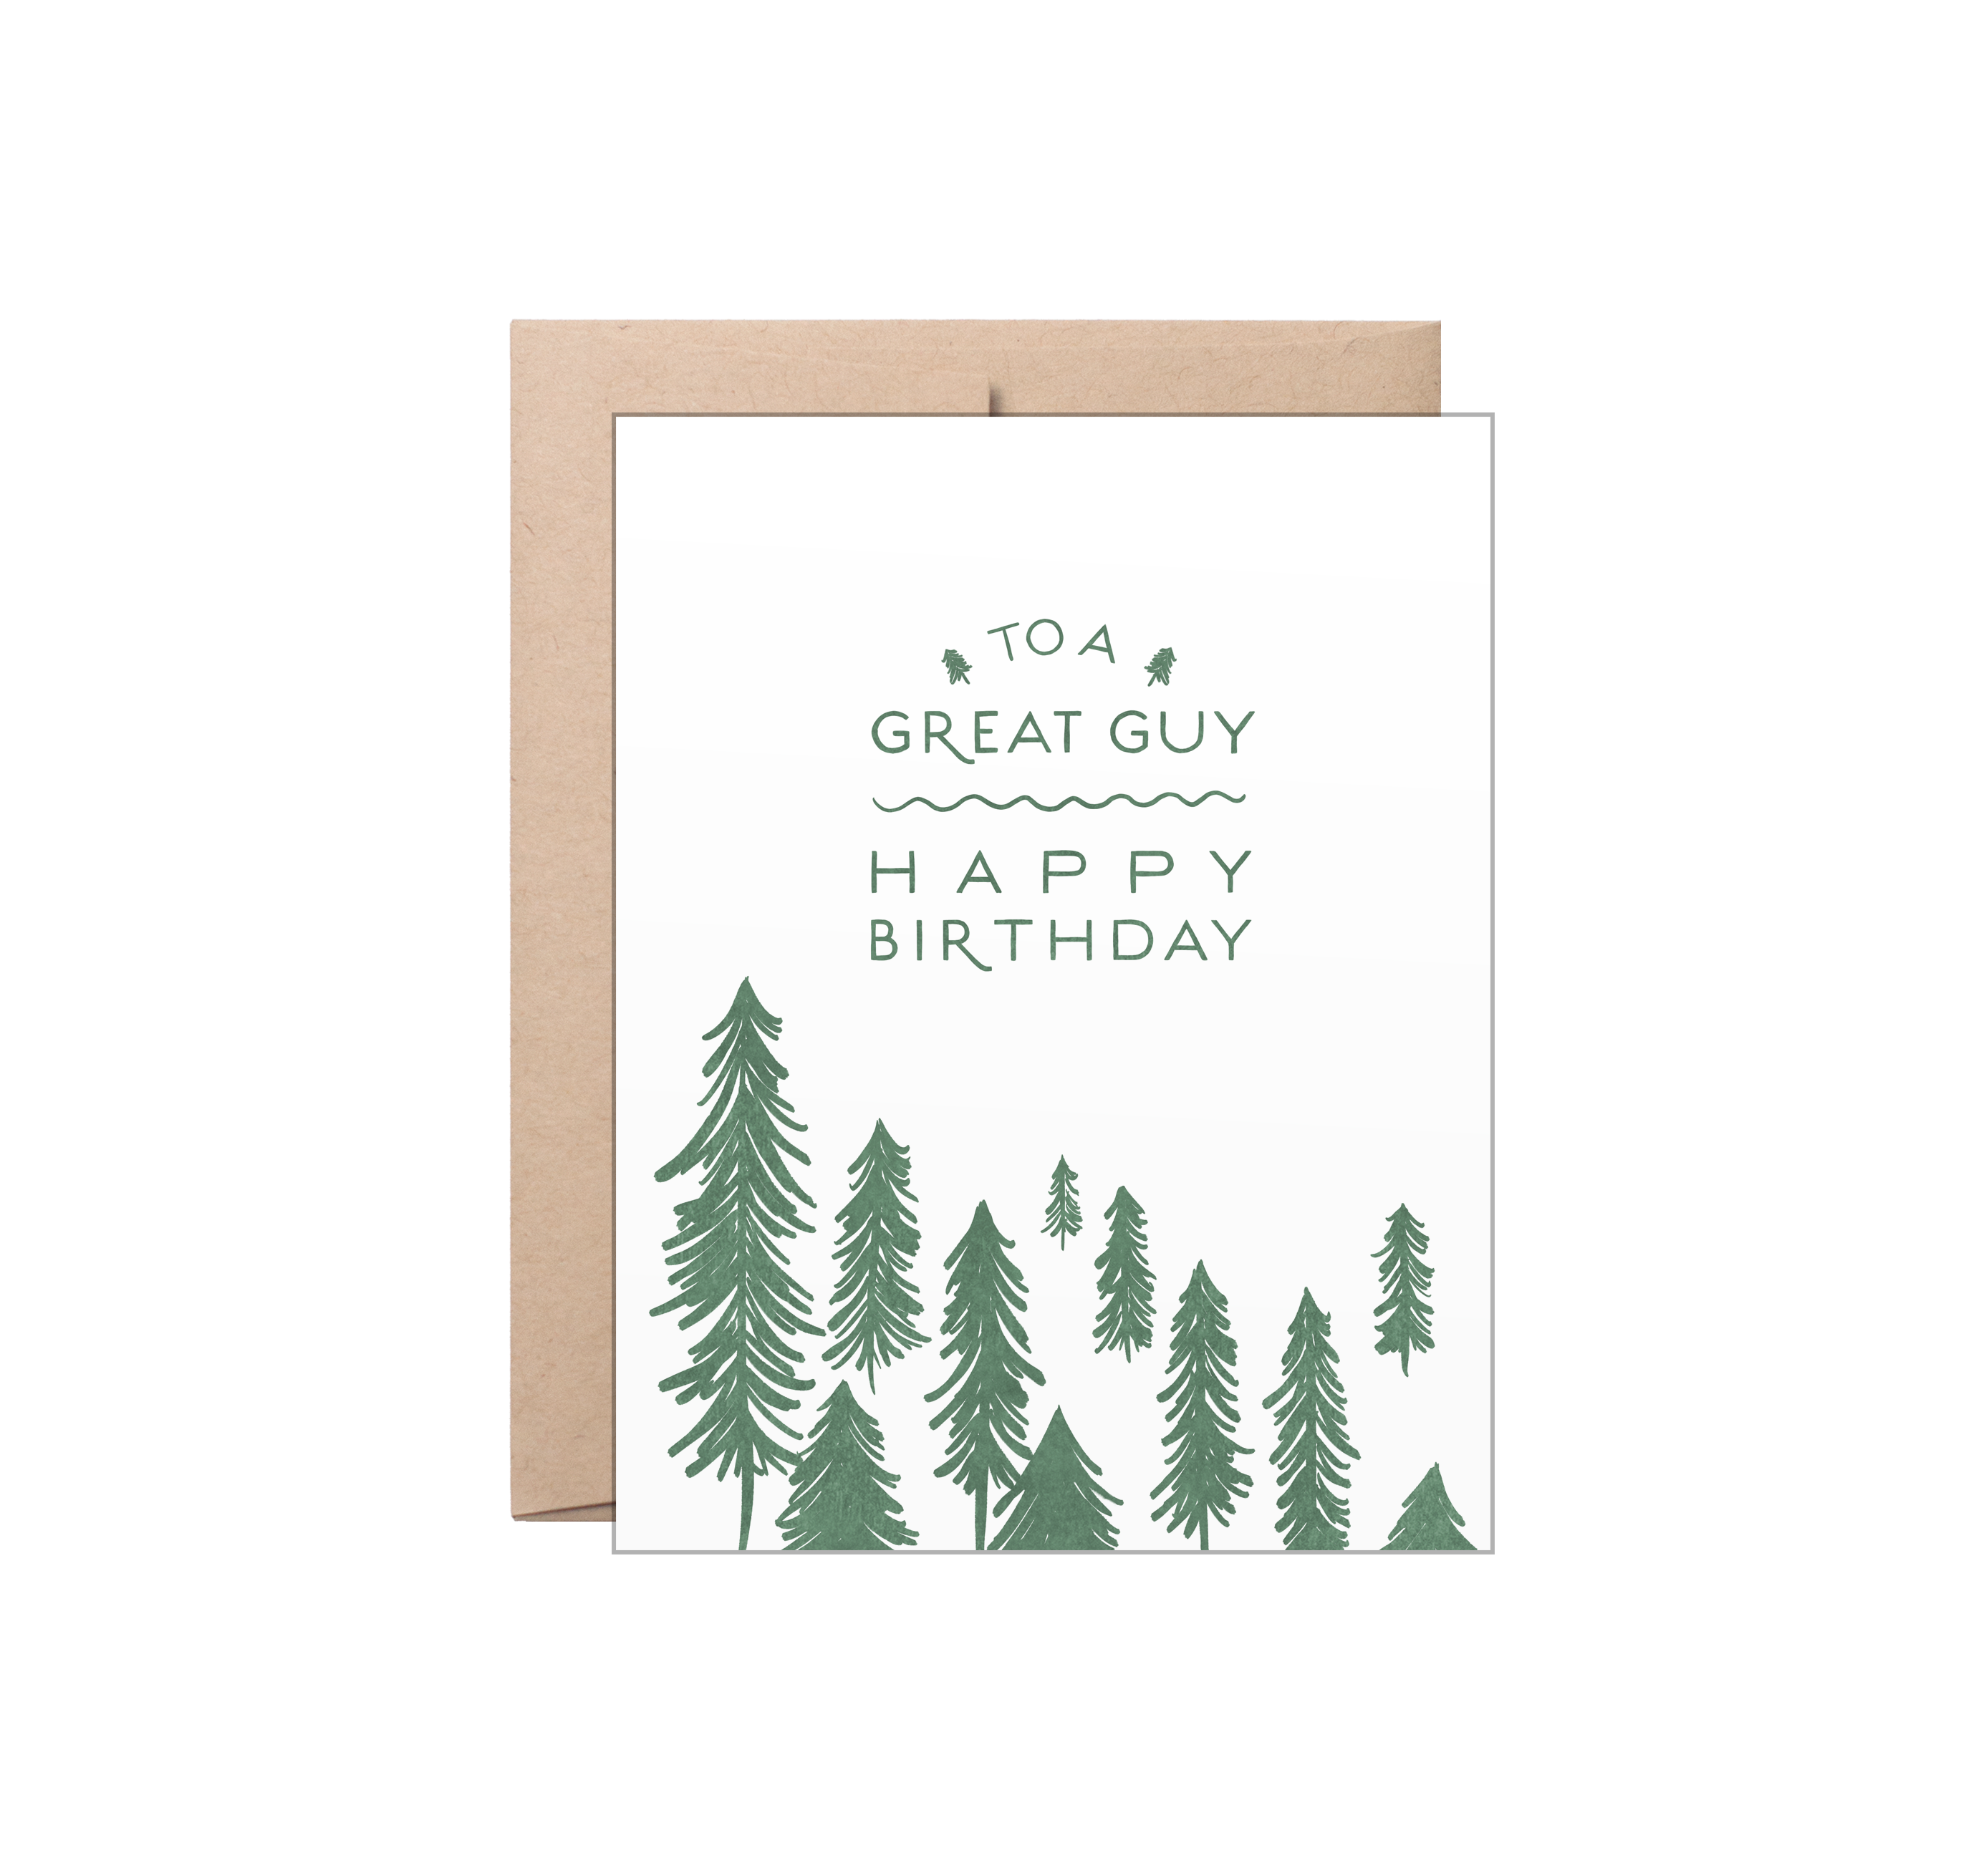 To a great guy Happy Birthday  - Letterpress Card